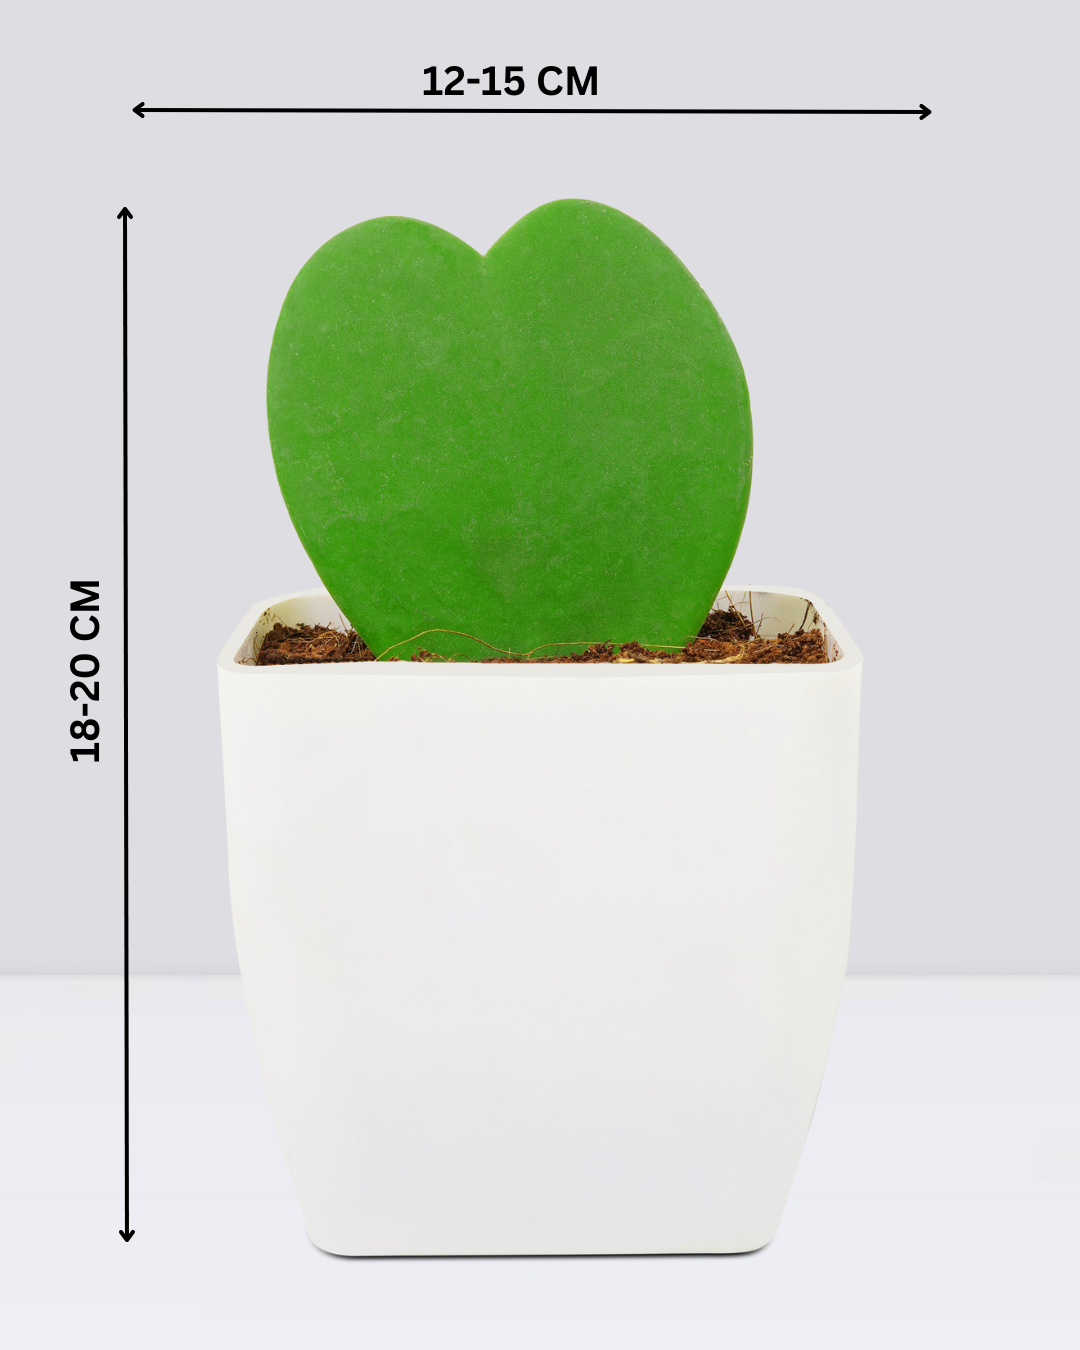 Good Luck Plants Combo-2 Layers Lucky Bamboo -Square Pot & Hoya Heart-White Square Pot